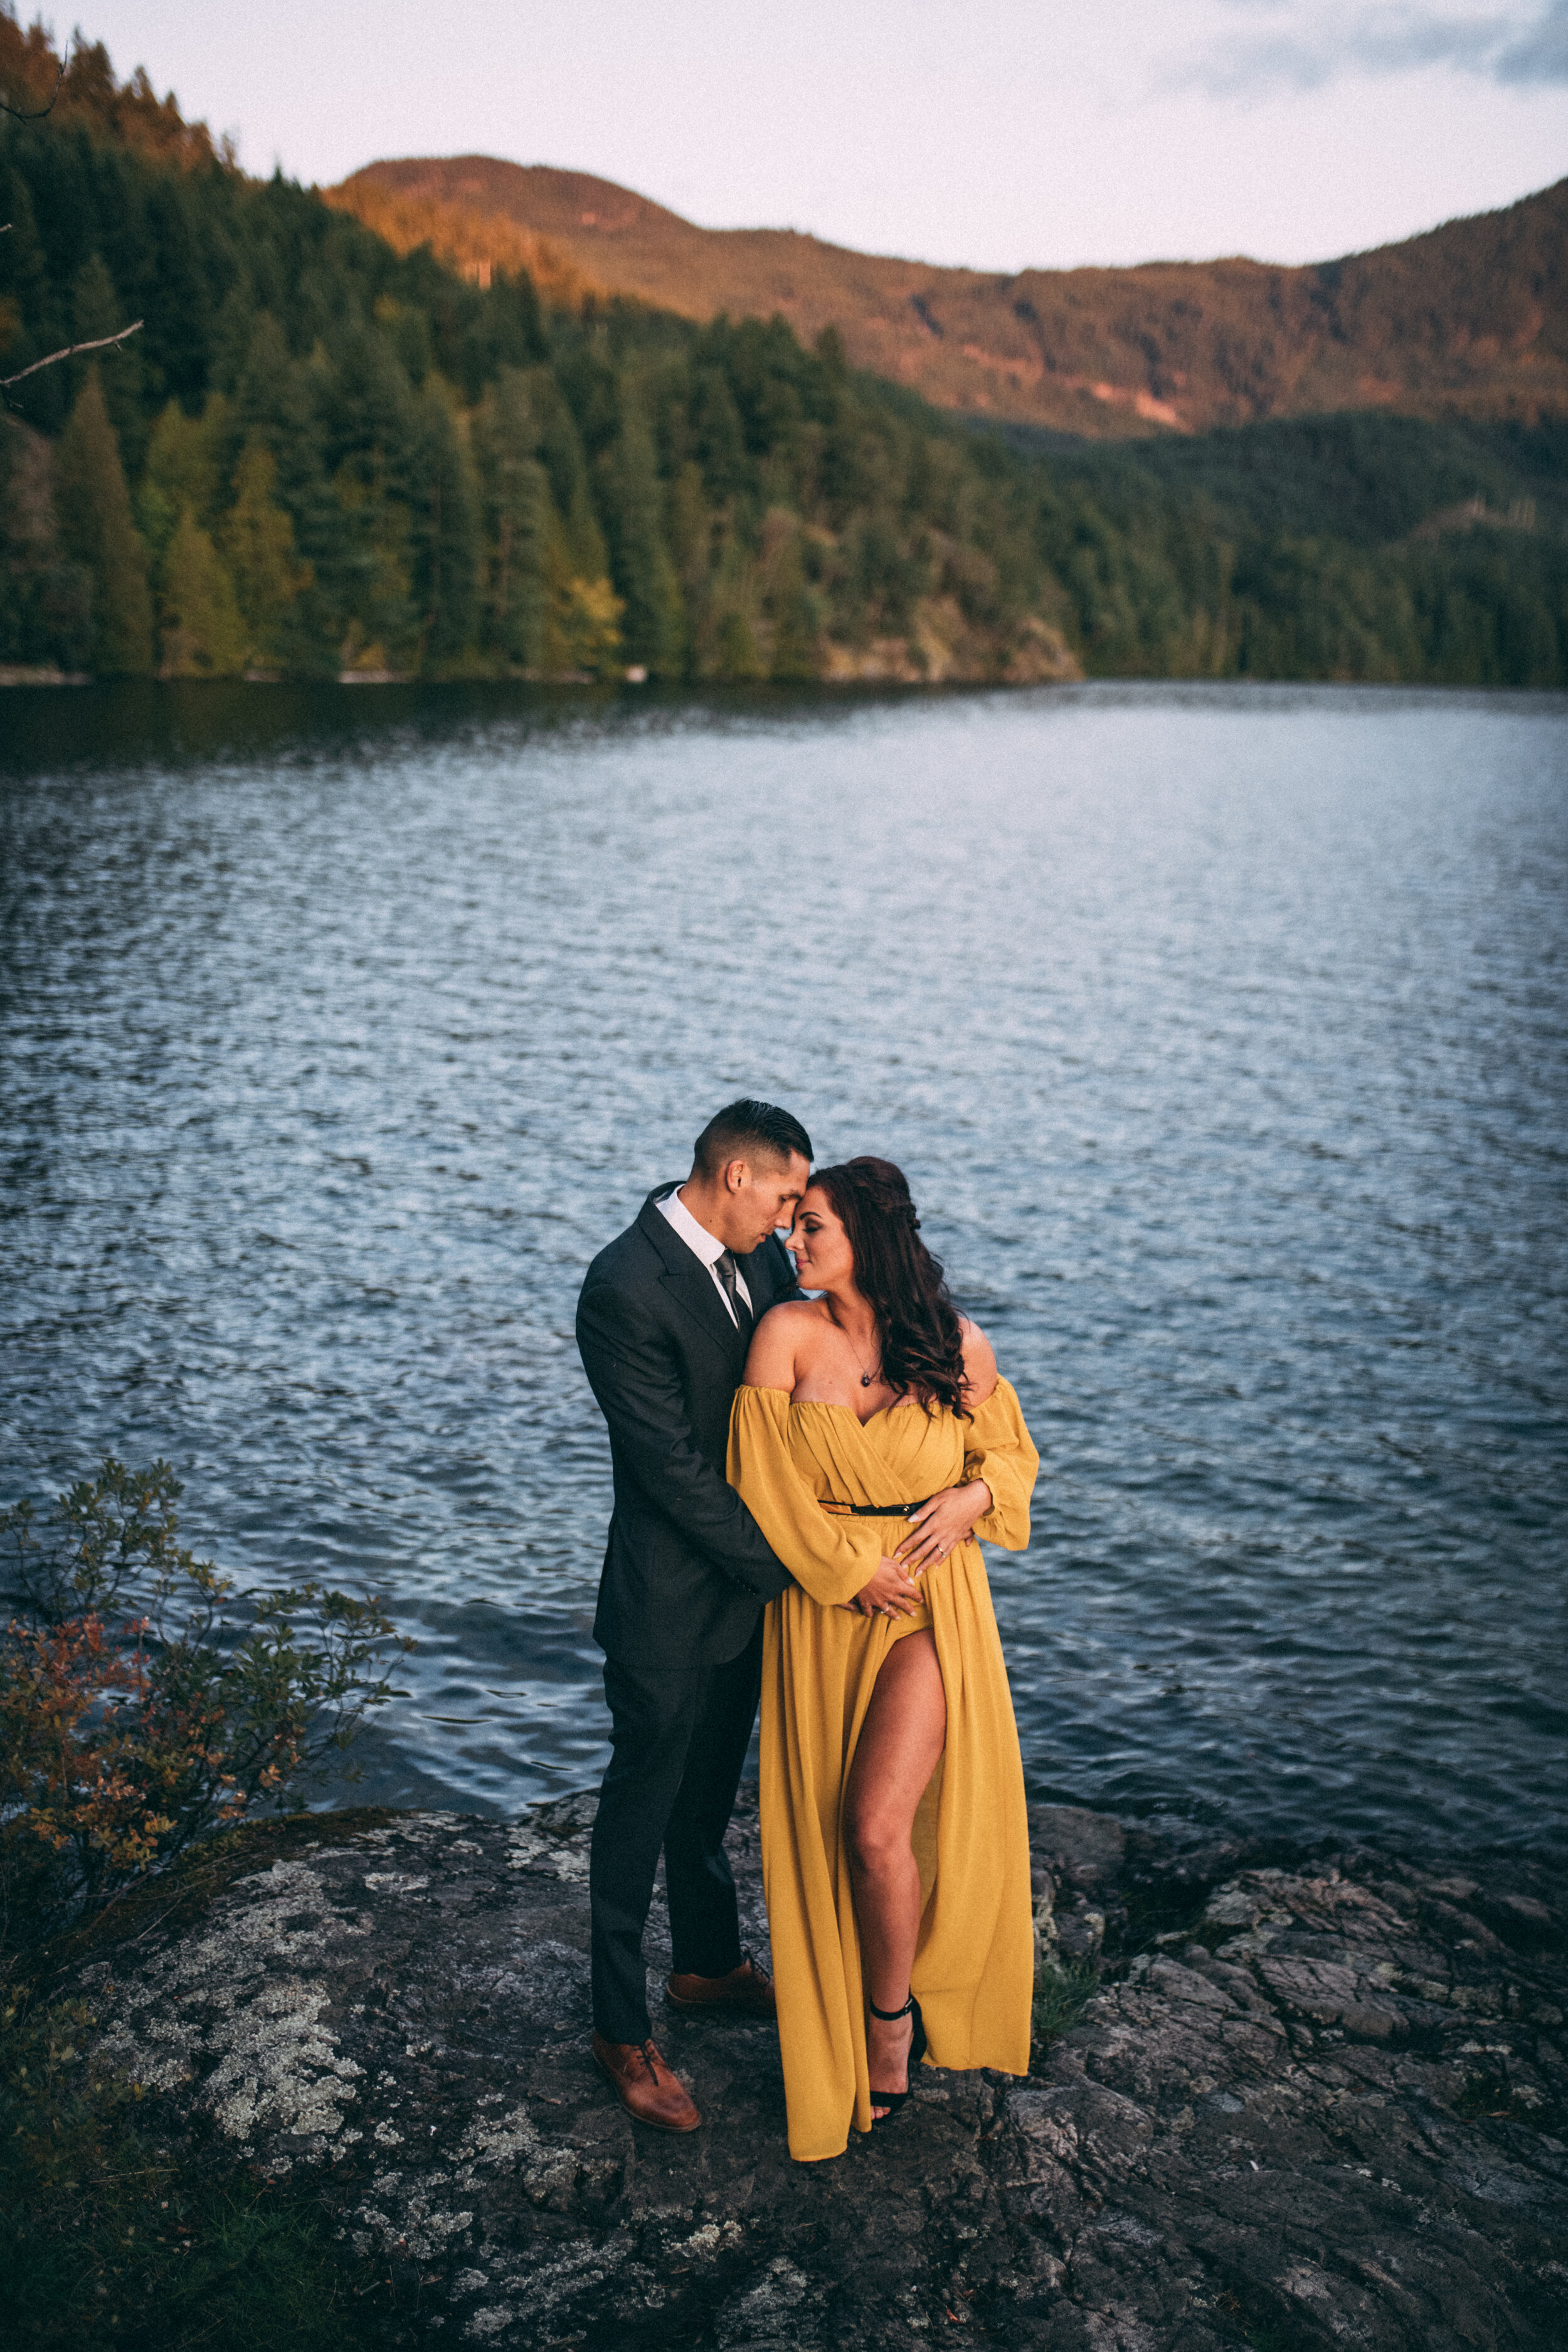 Caitlin & Kevin - Ruby Lake Engagement Session - Pender Harbour, BC - Laura Olson Photography - Sunshine Coast BC Wedding & Elopement Photographer-8829.jpg